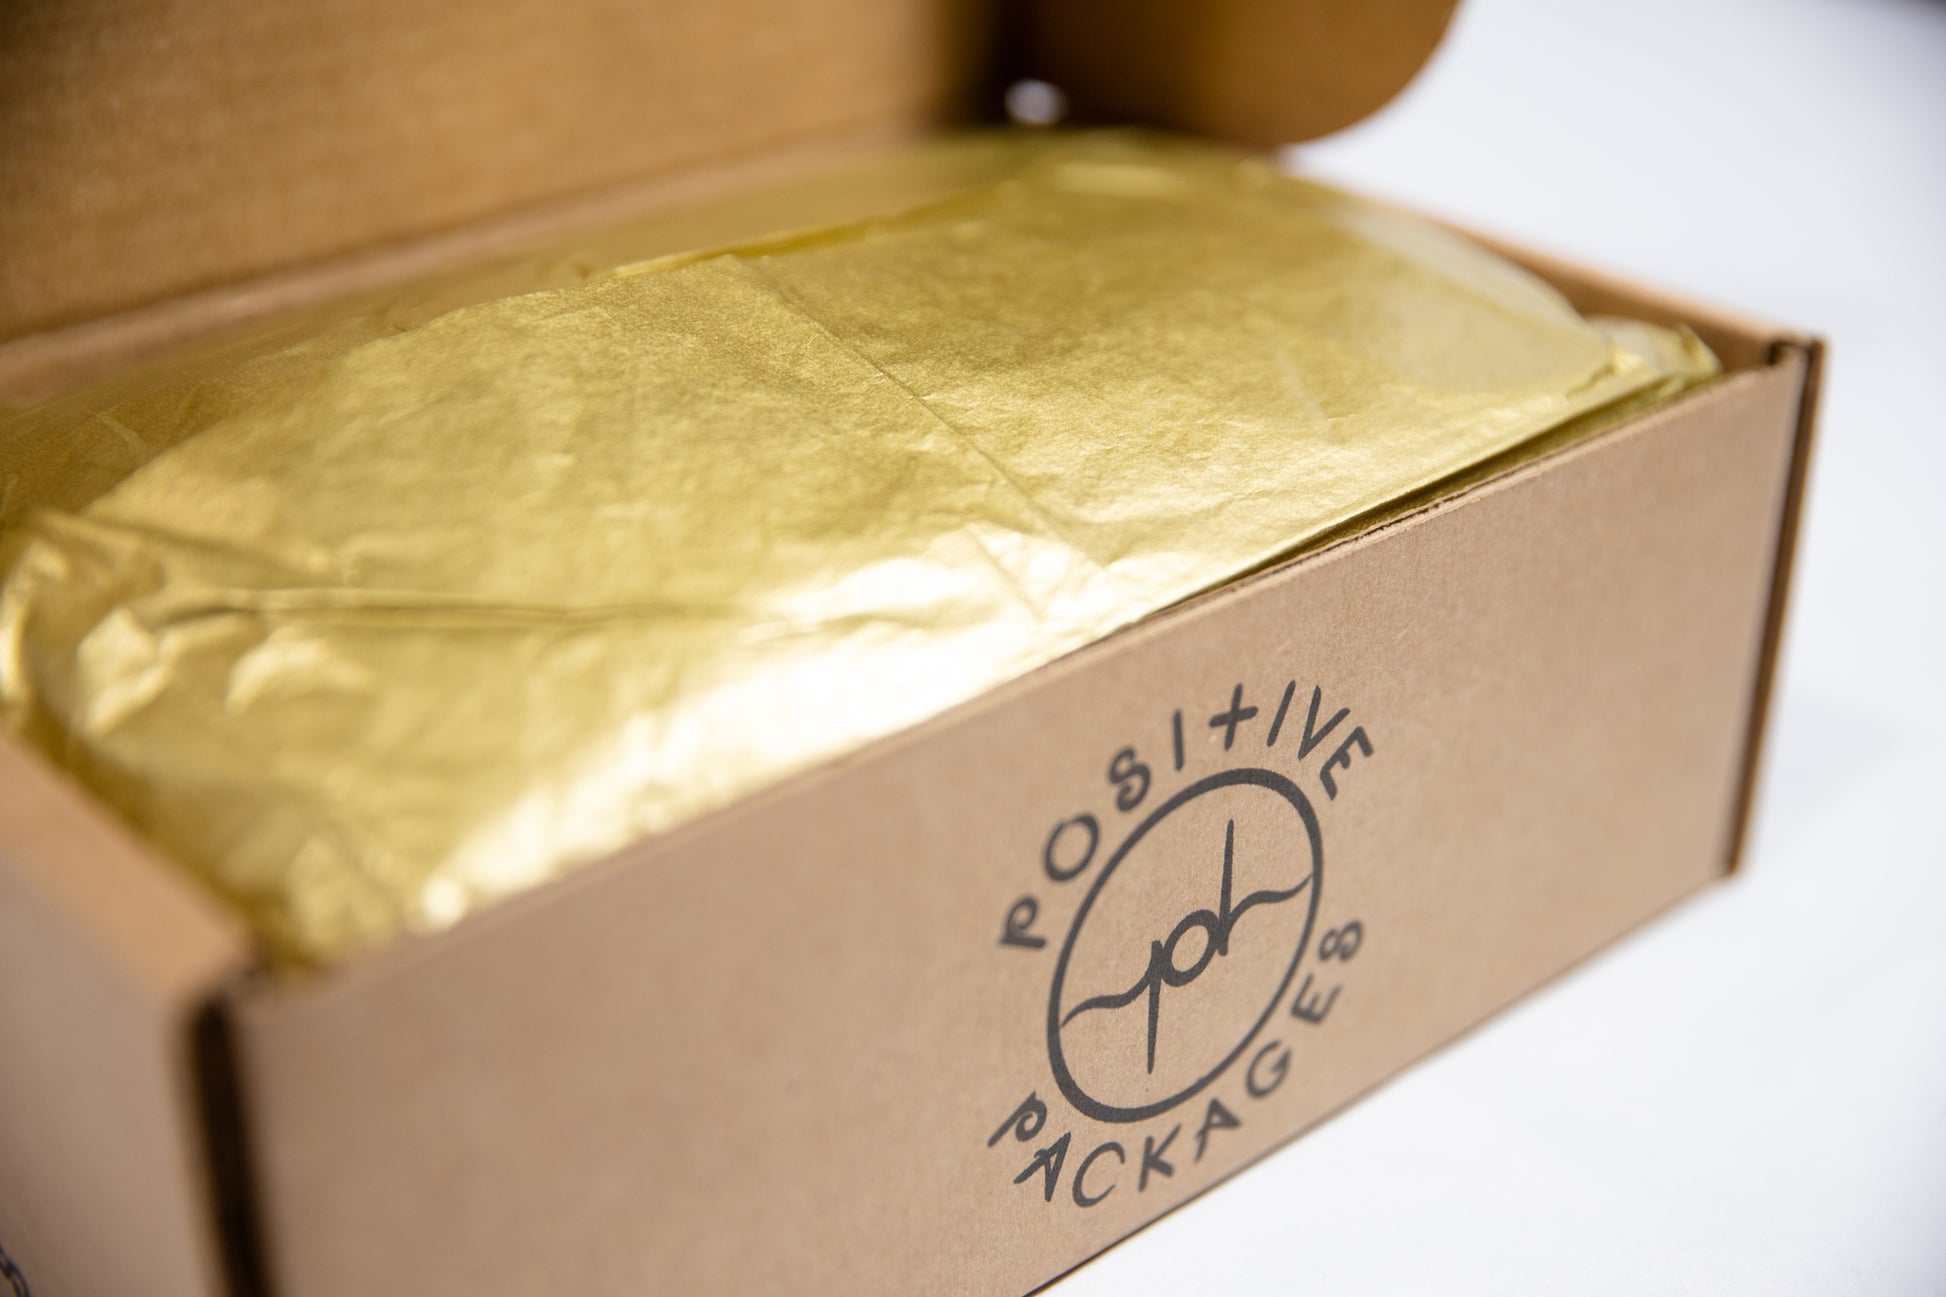 Every Positive Package is wrapped in gold, reminding us that we are valuable!